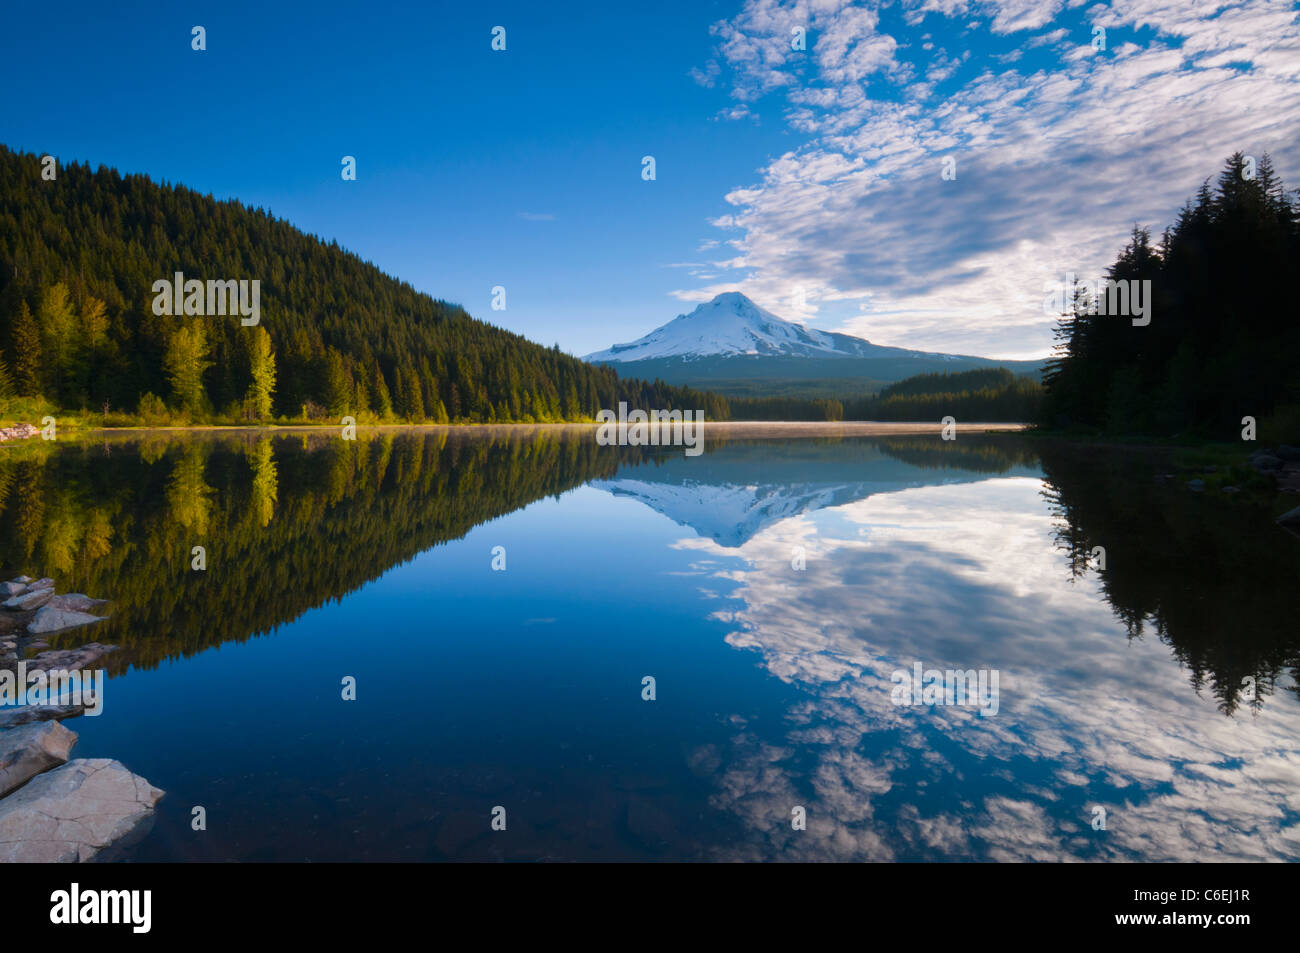 USA, Oregon, Clackamas County, View of Trillium Lake with Mt Hood in background Stock Photo